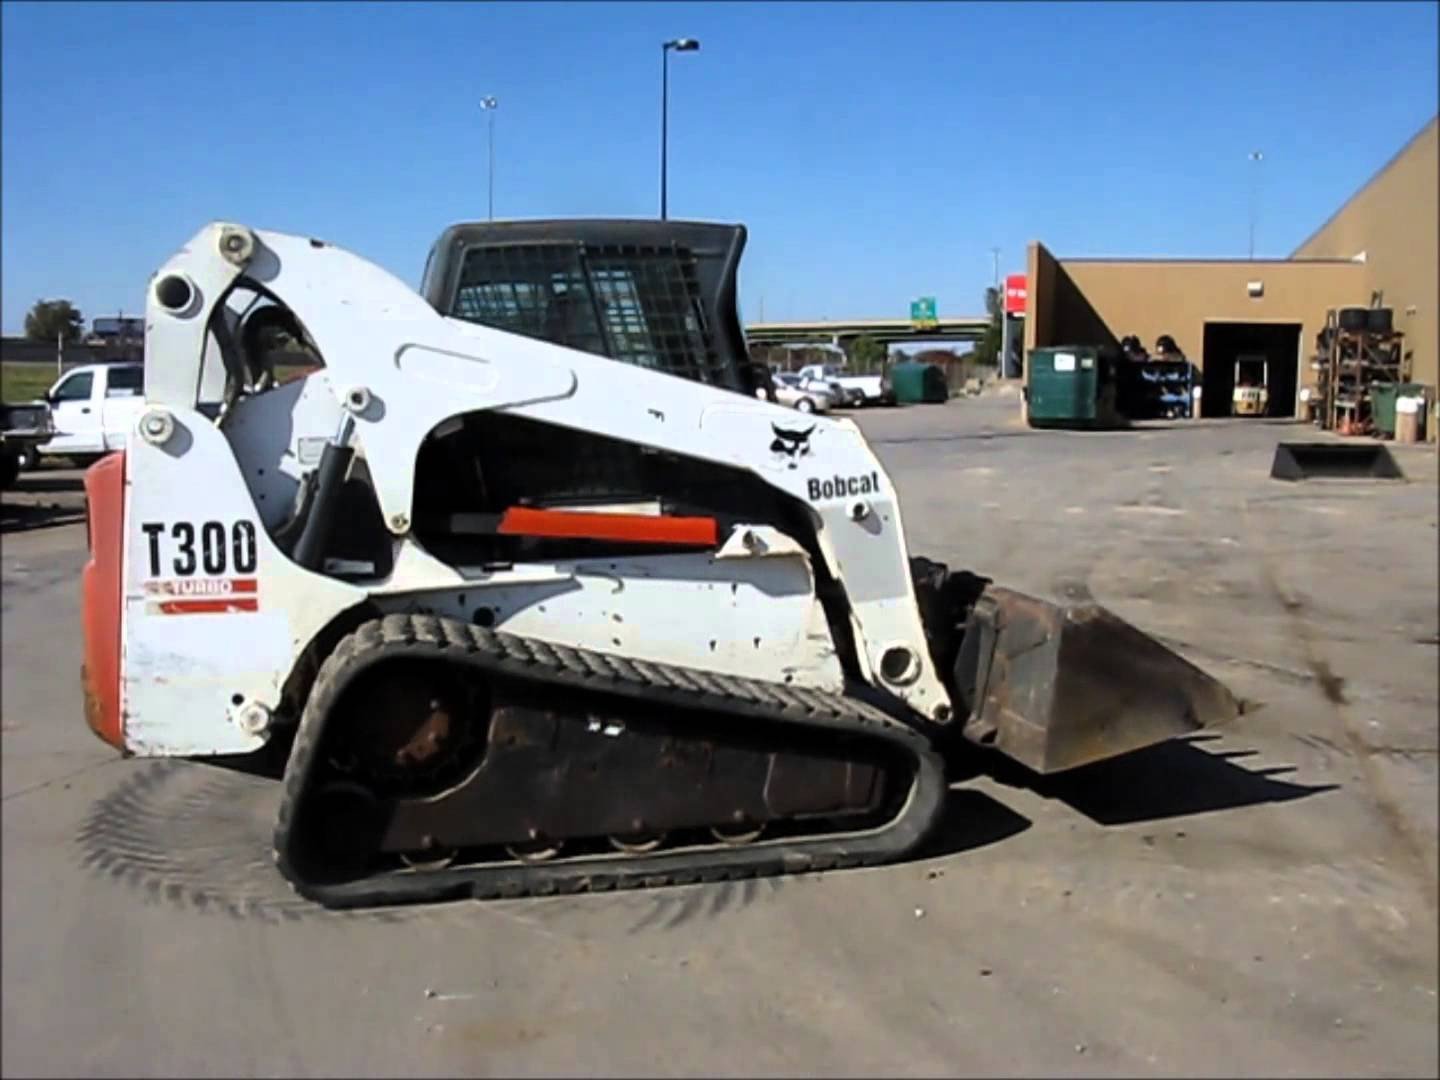 Bobcat T300 Turbo T300 Turbo High Flow Compact Track Loader Service Repair Workshop Manual DOWNLOAD SN 525411001 Above SN 525511001 Above